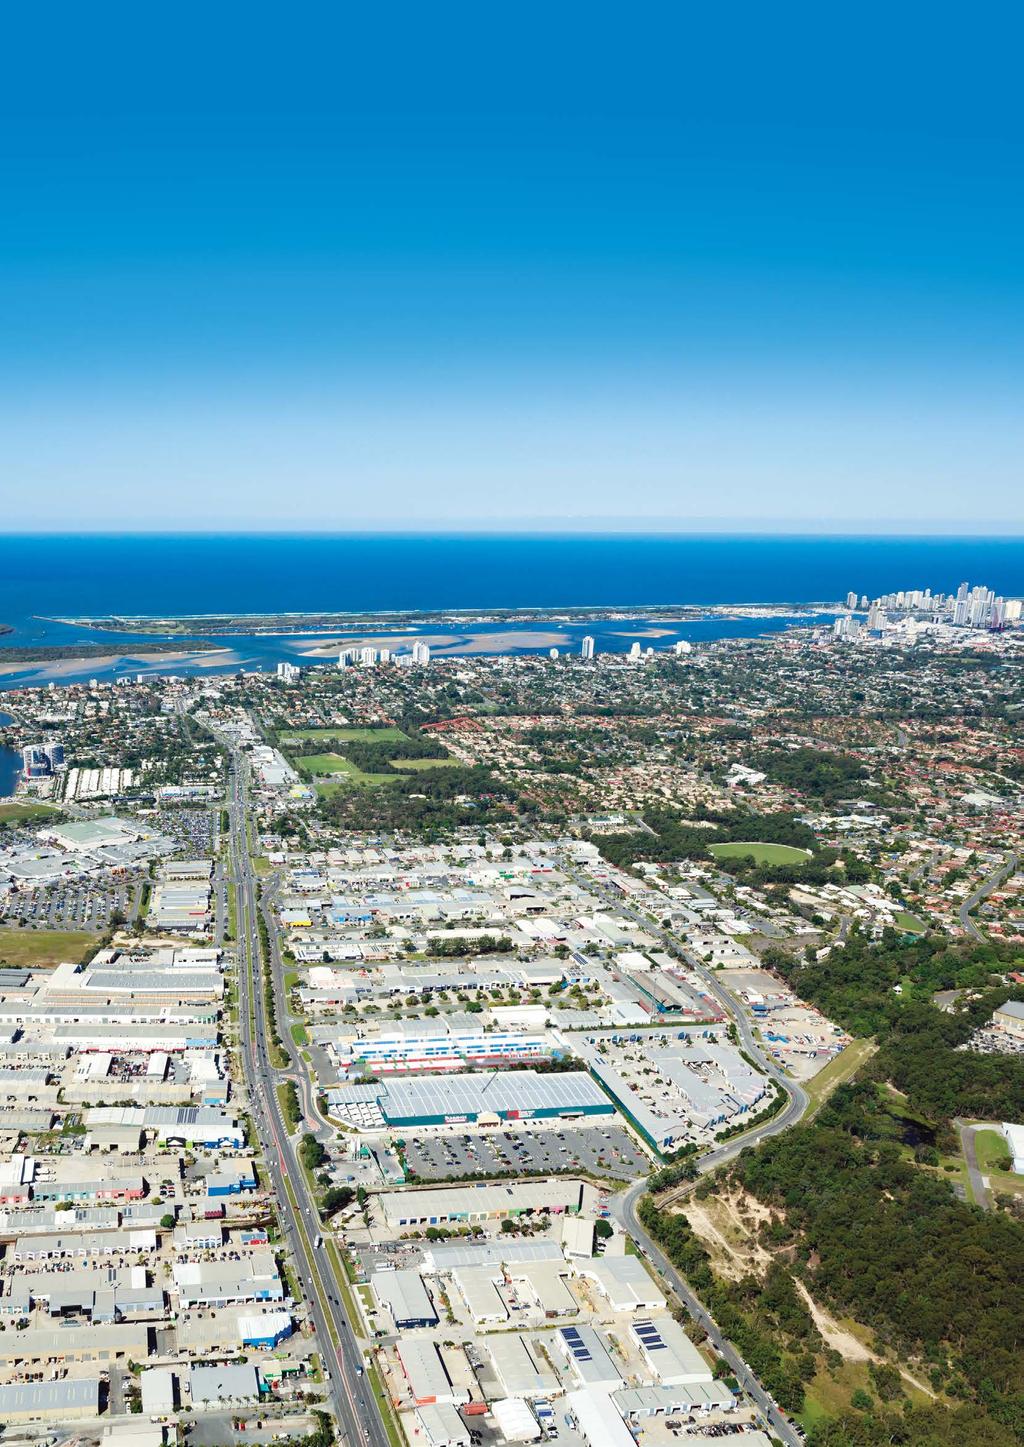 Economic conditions have favoured property investment in Australia for some time.